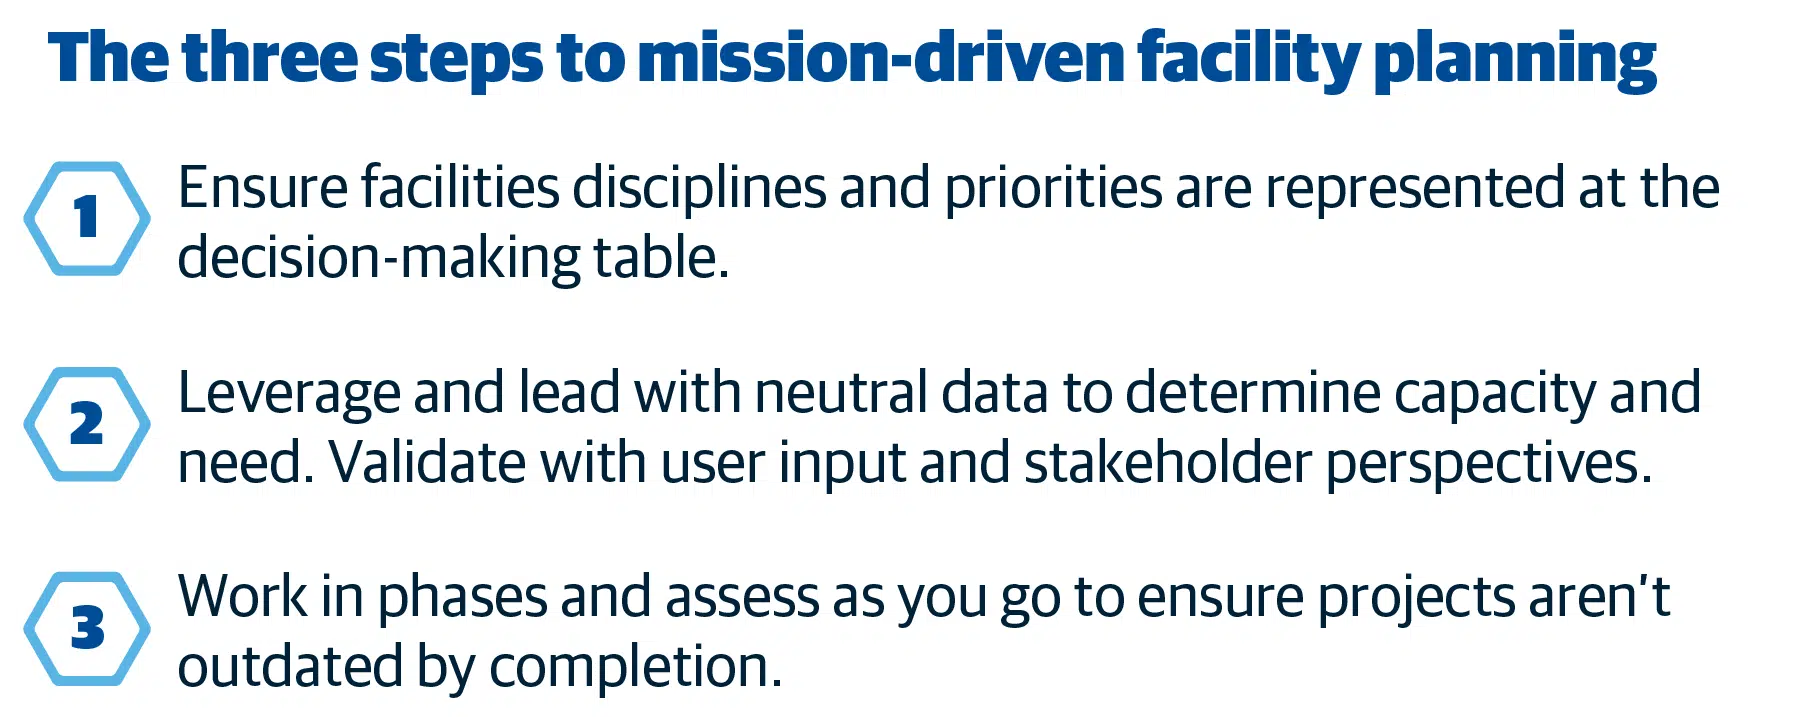 Three Steps to Mission-driven Facilities Planning graphic